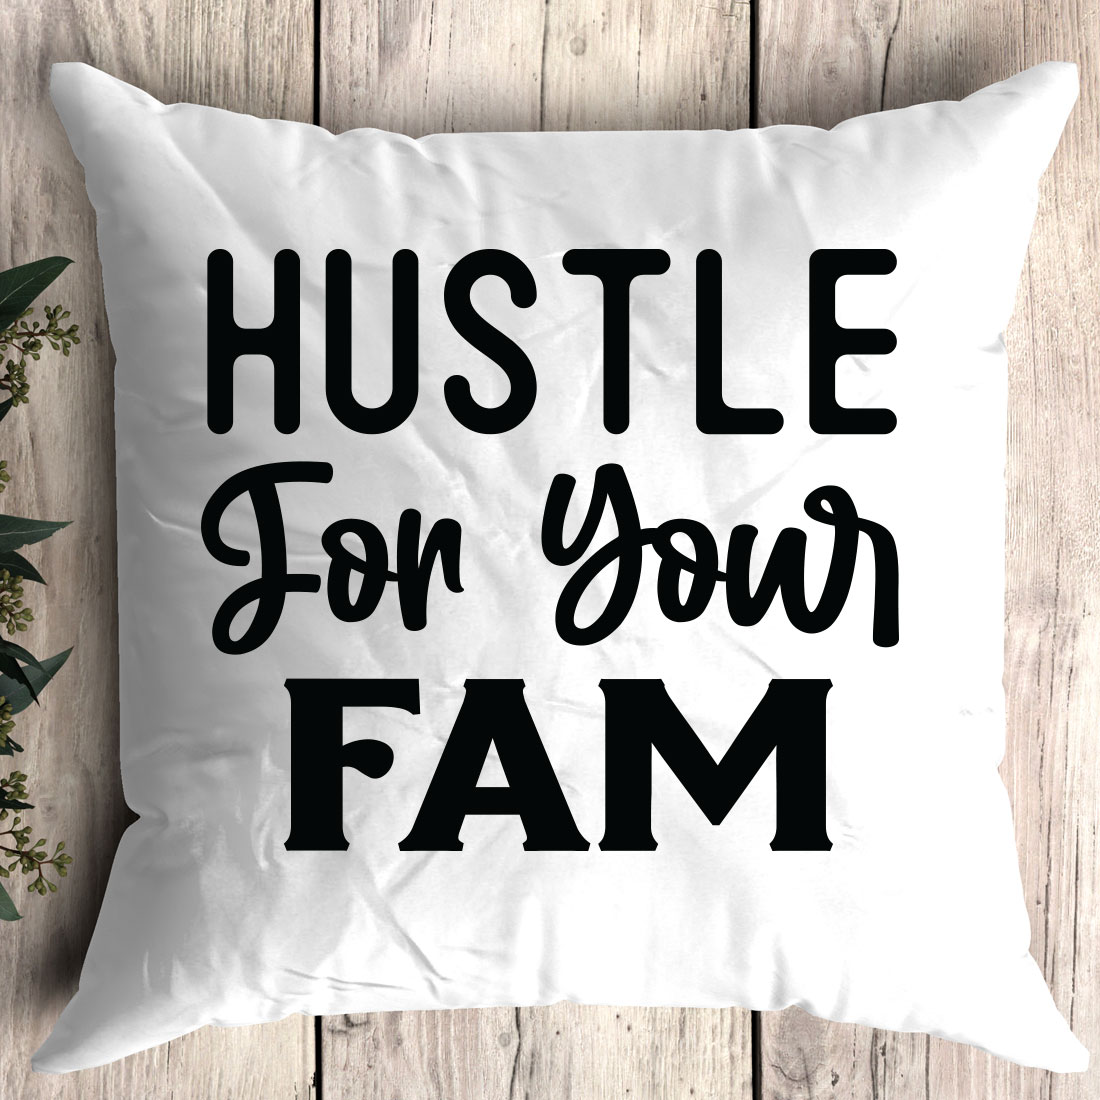 Pillow that says hustle for your fam.